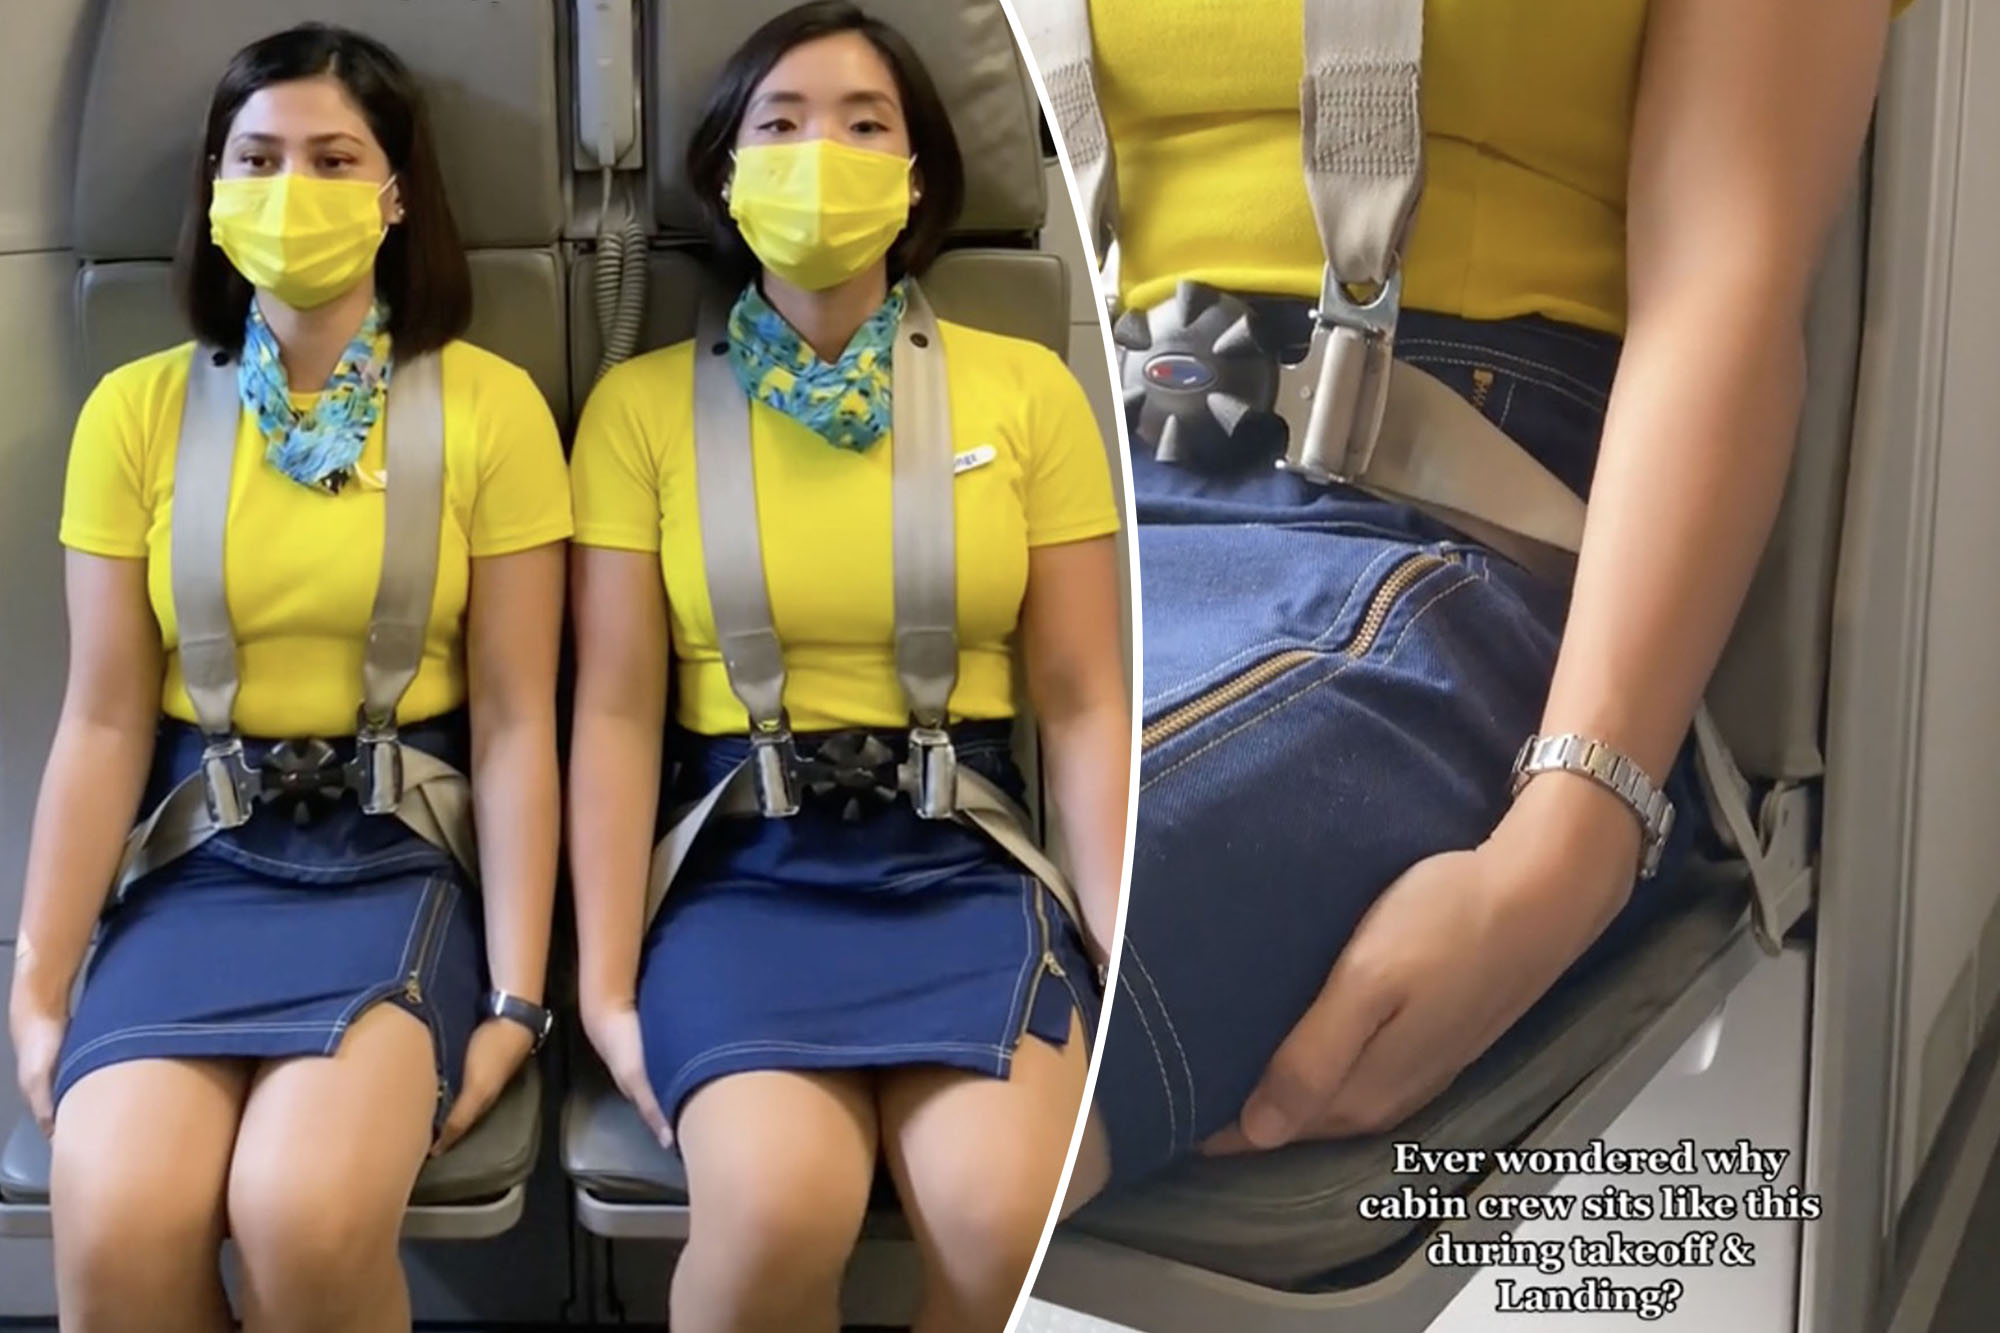 (Left) TikTok user and flight attendant Cebu Pacific Henny Lim, 29, and colleague in their jump seats. (Right) Close-up of Lim sitting on her hands in her jump seat.